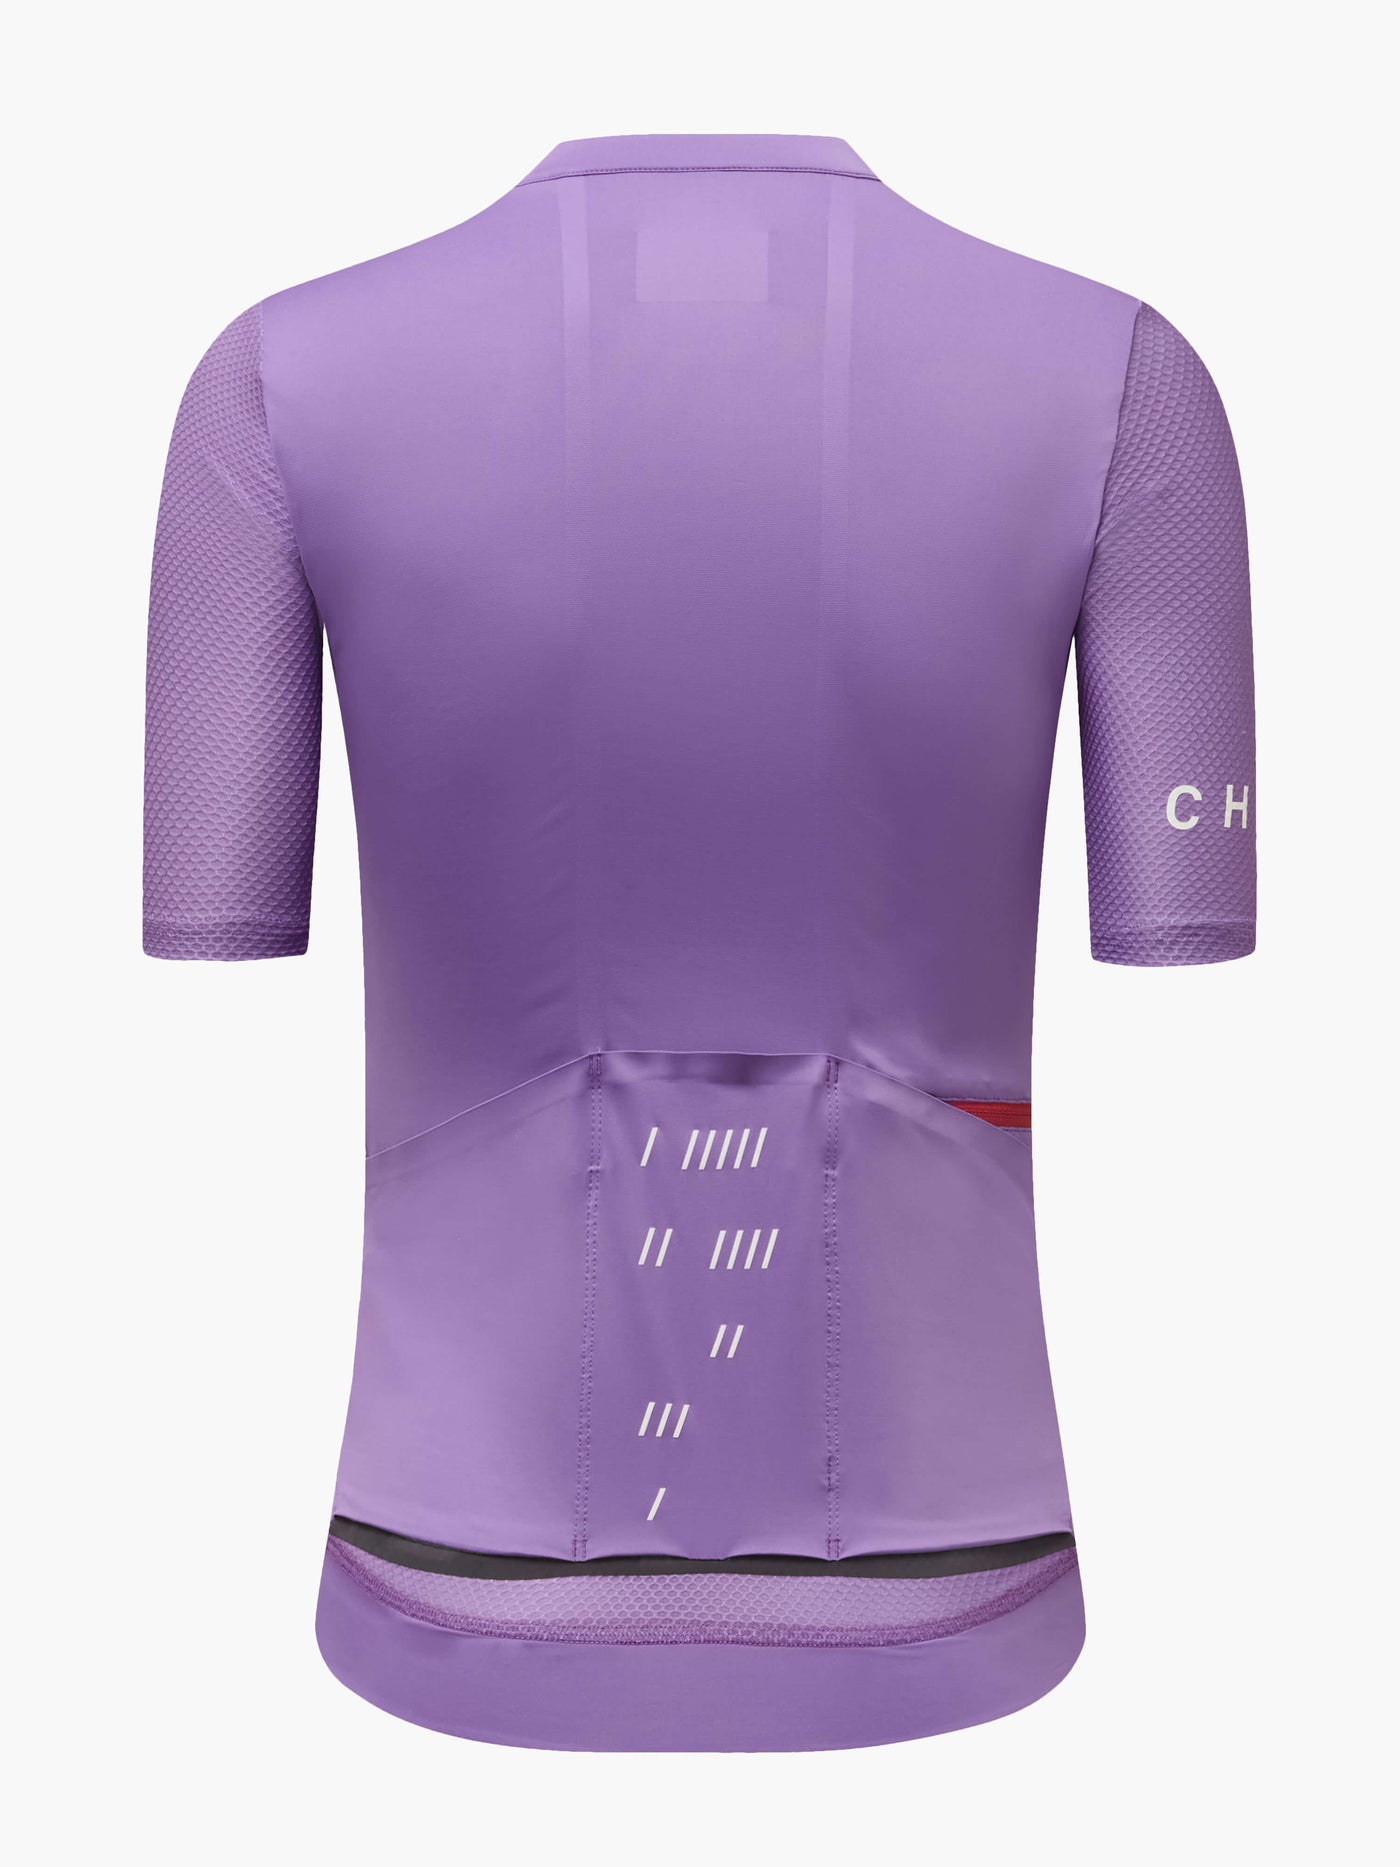 CHPT3 women's short sleeve Aero jersey, in Electric Lavender, viewed from back#color_electric-lavender